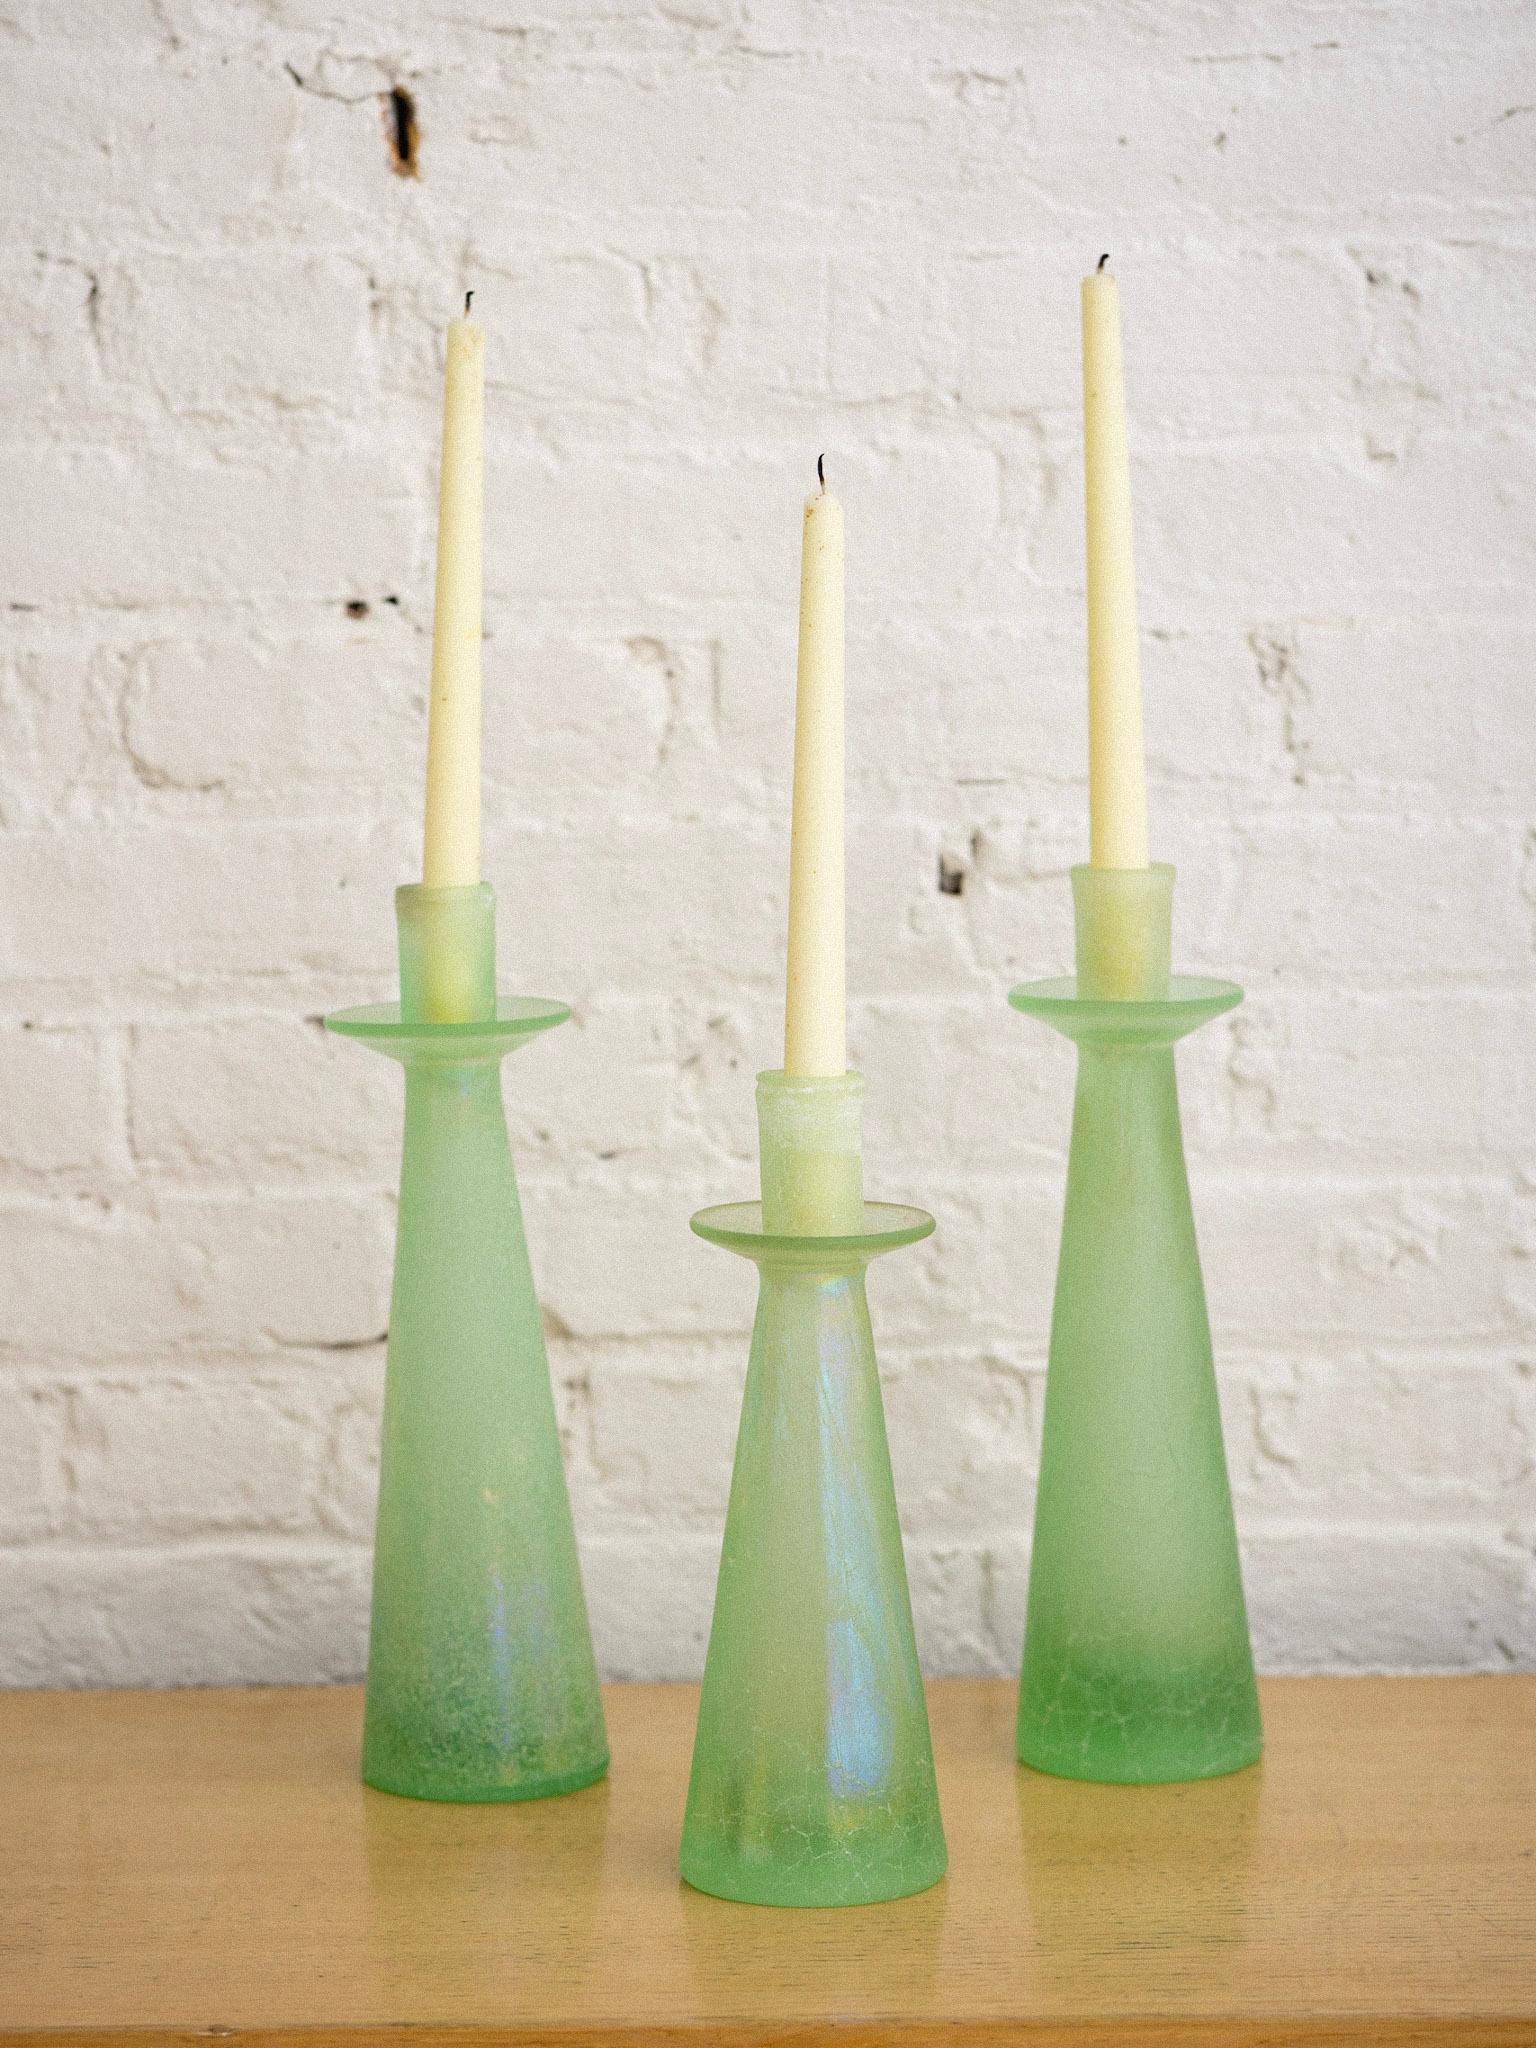 A trio of candle holders in the style of Cenedese. Two larger candle holders and one smaller. Scavo glass featuring a textured iridescent surface.